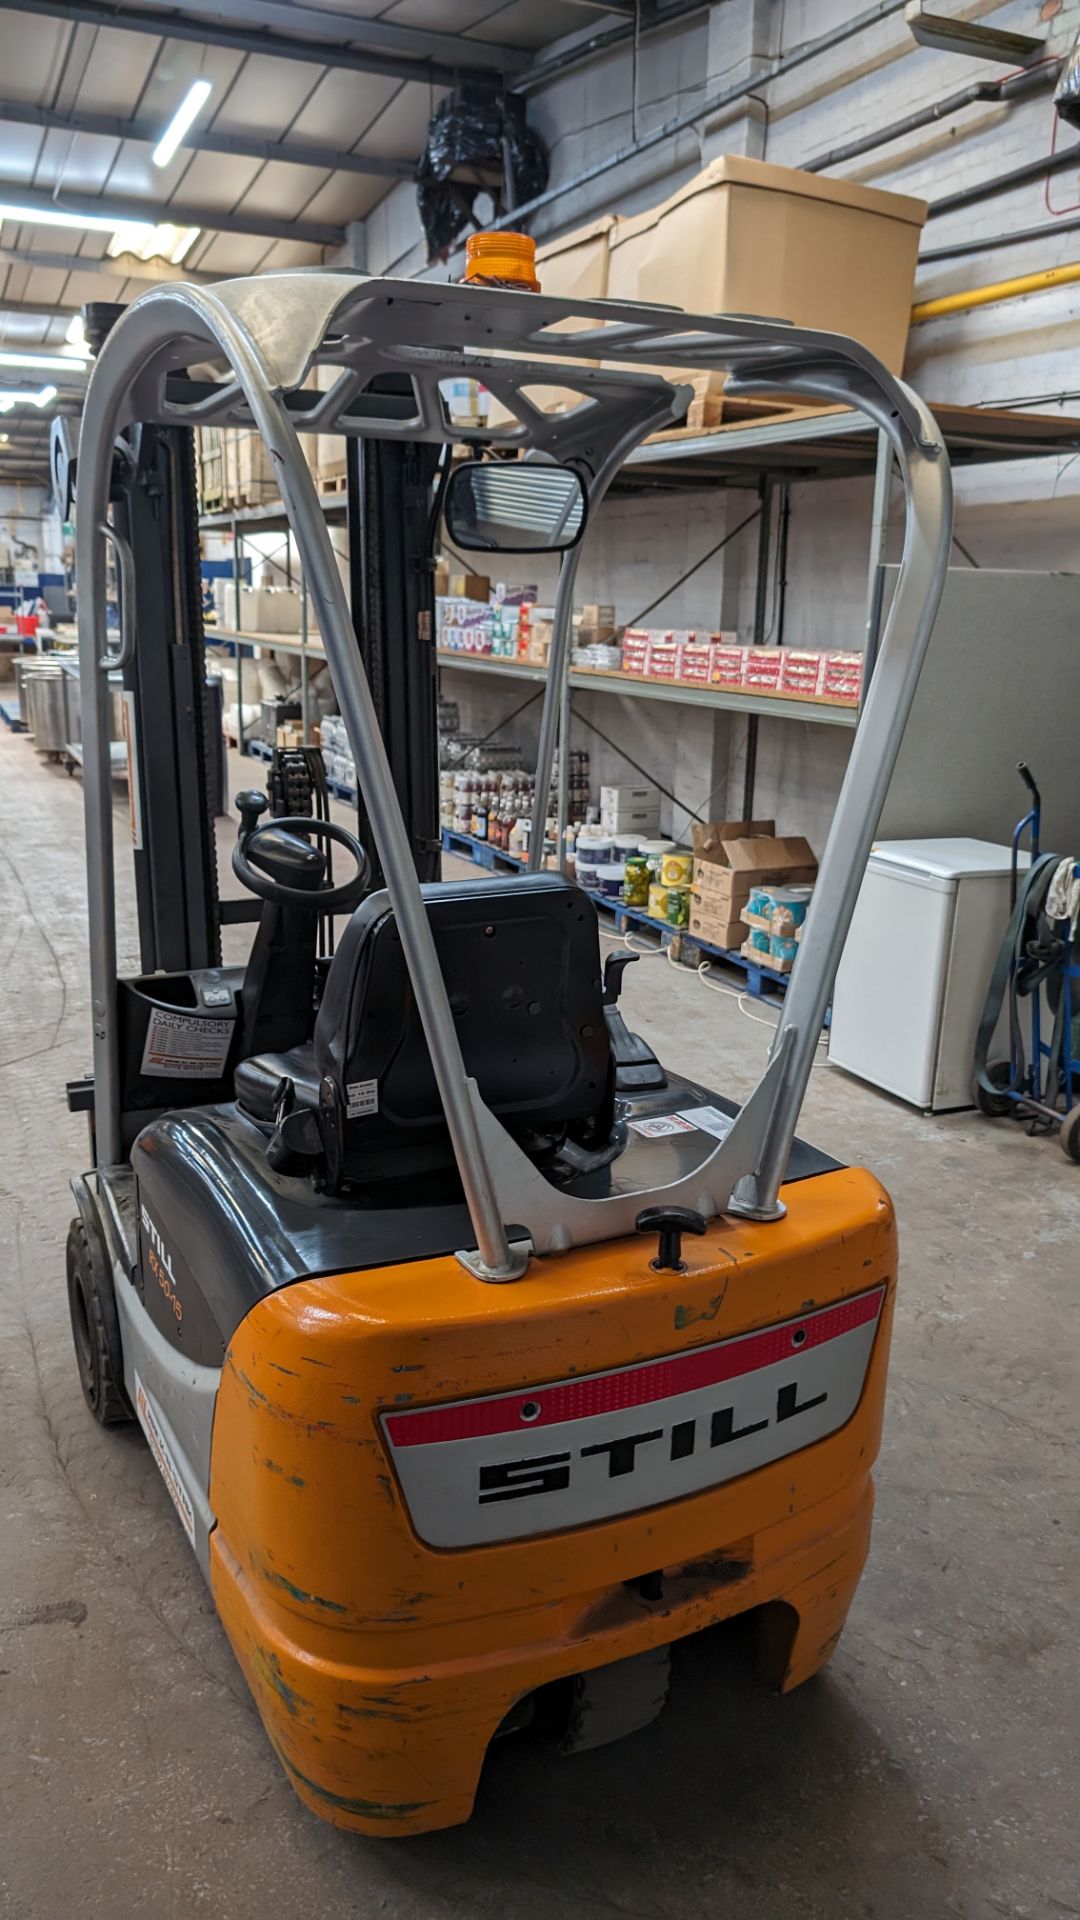 Still model RX-5015 3-wheel electric forklift truck with sideshift, 1.5 tonne capacity, including St - Bild 17 aus 18